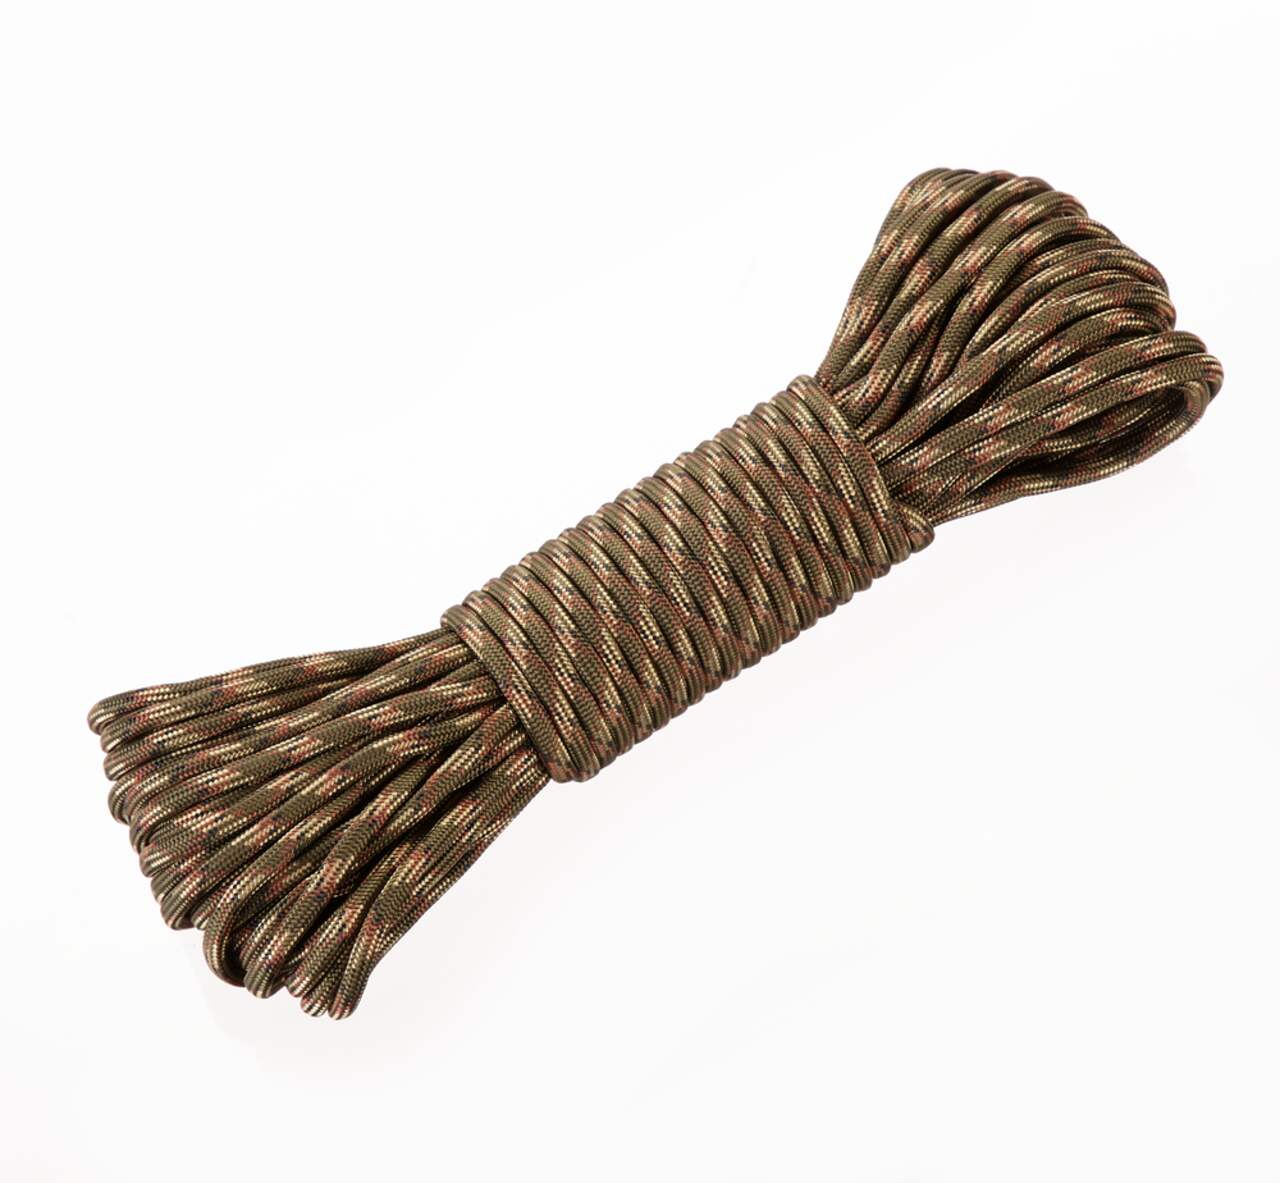 100 feet Nylon 550 Paracord 550 fire Cord Paracord with Fishing line and  fire Starter Mil-Spec Type III Paracord 5/32 Diameter 550 Cord fire